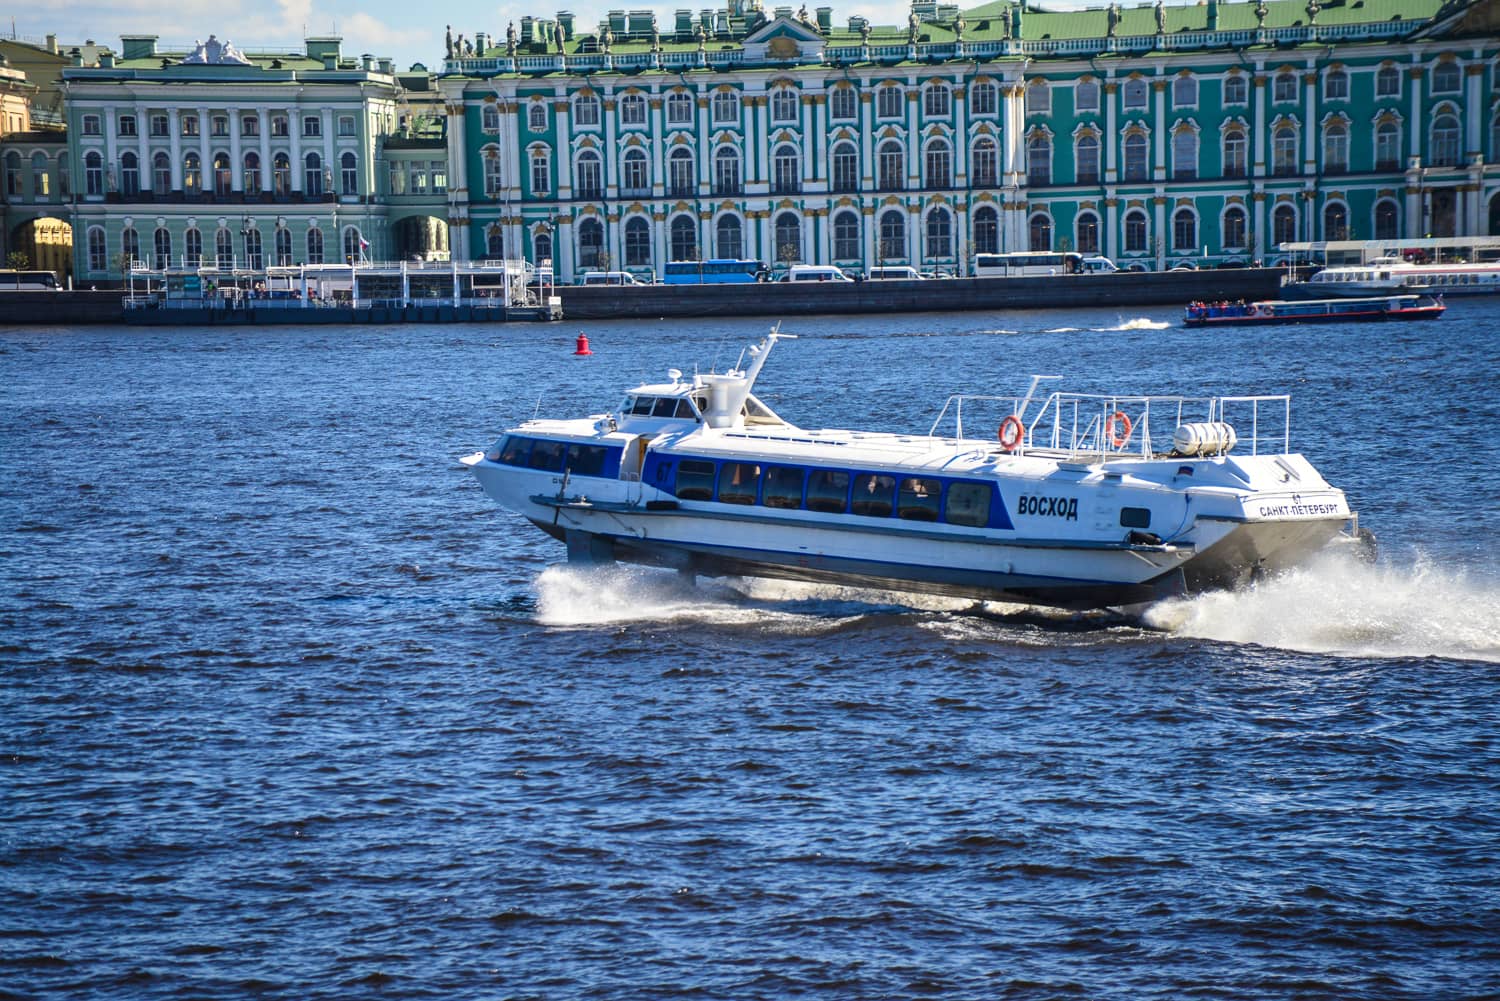 High speed hydrofoils ply the river in summer. The hermitage is in the background.